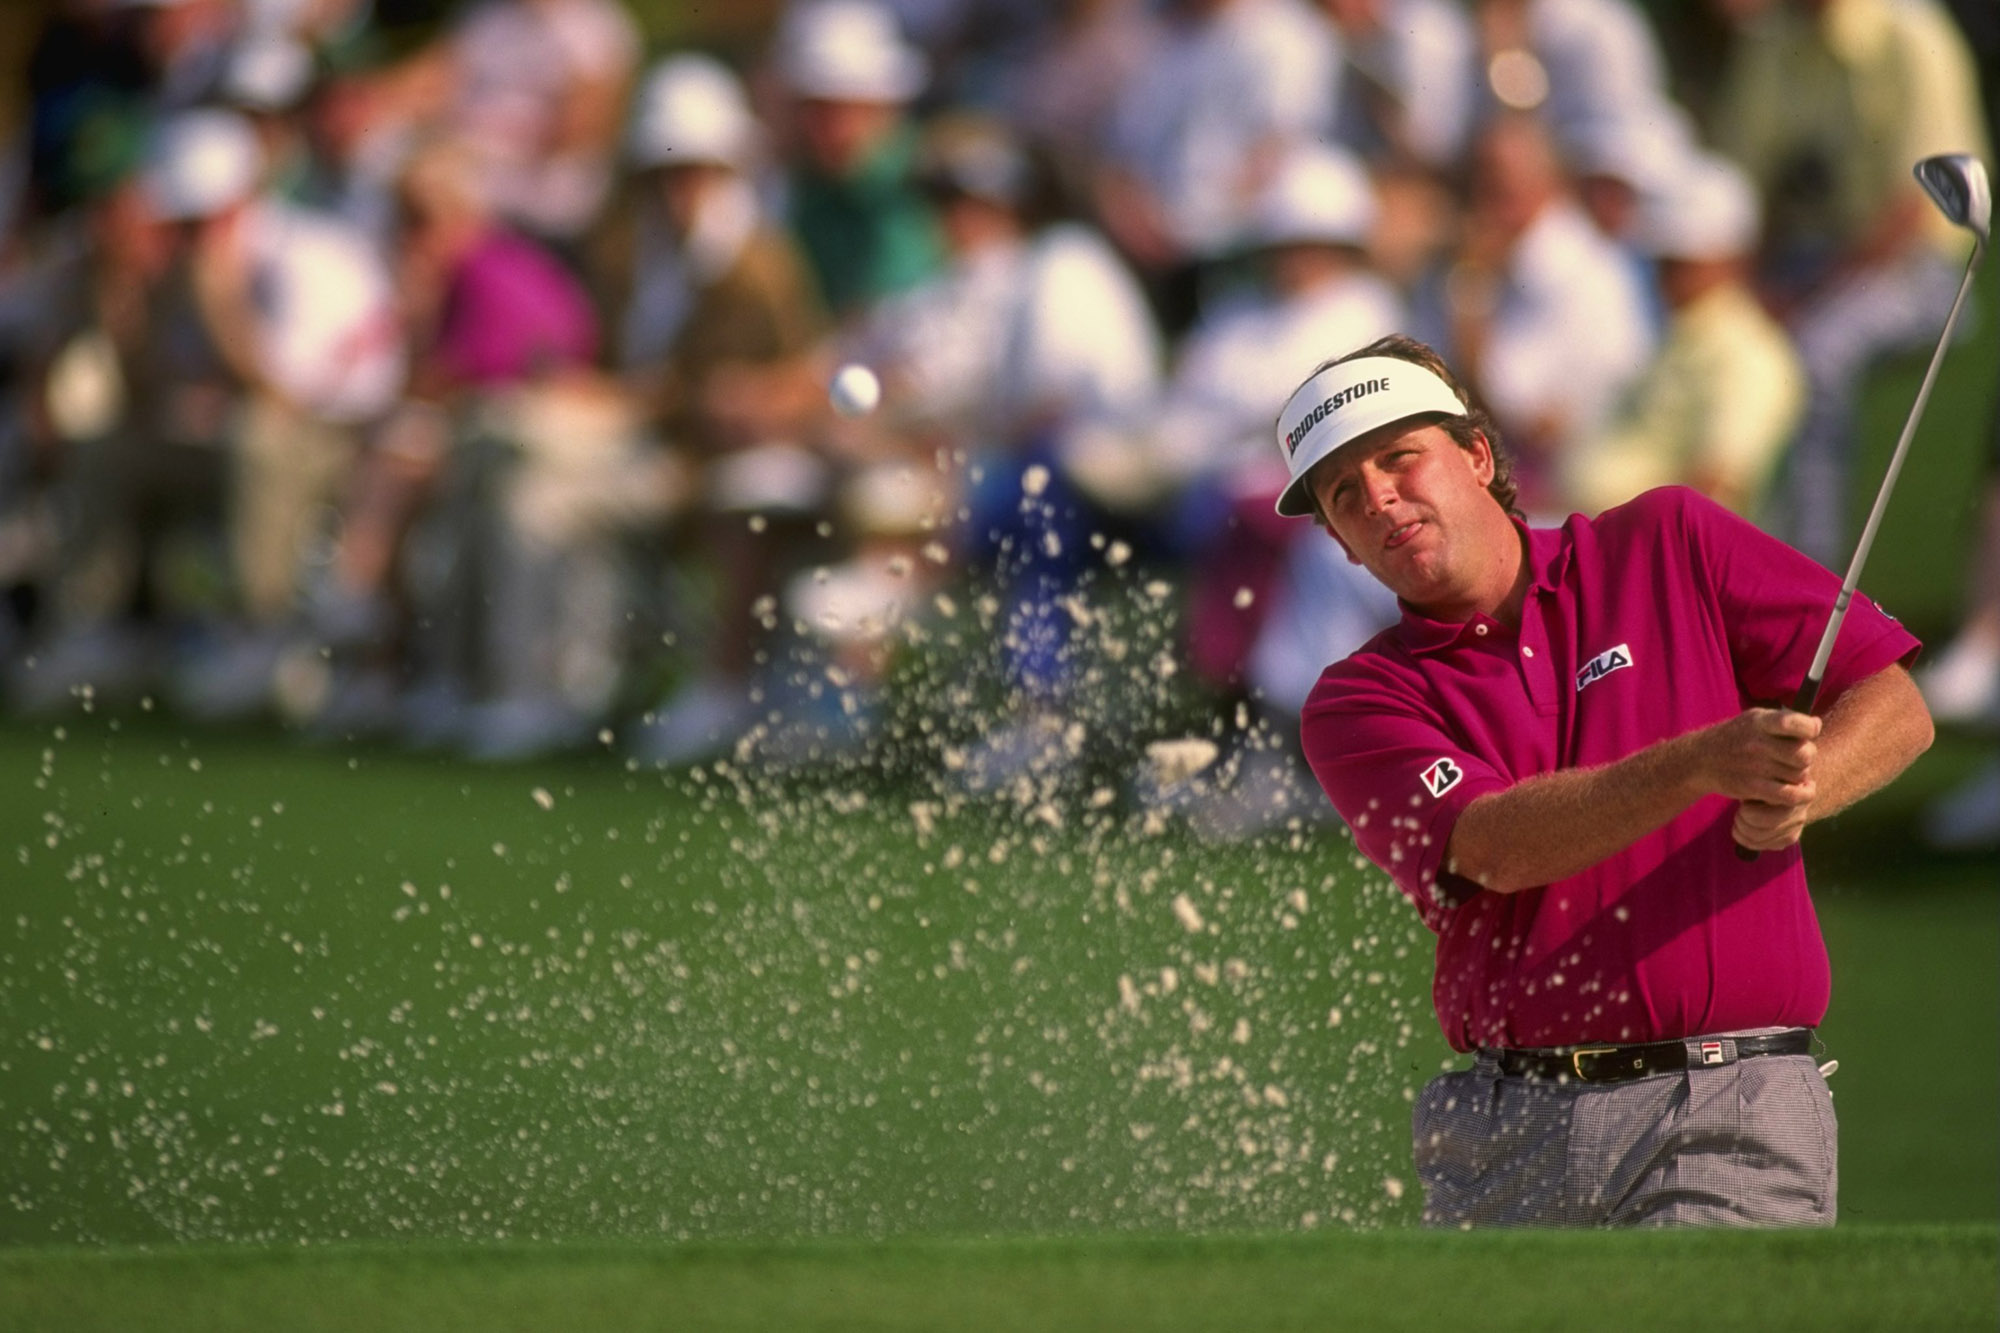 Mark Calcavecchia raced home in 29 shots in 1992, a score that would later be matched by David Toms in 1998 - both scores impressively recorded in the final round (Photo: Getty Images)